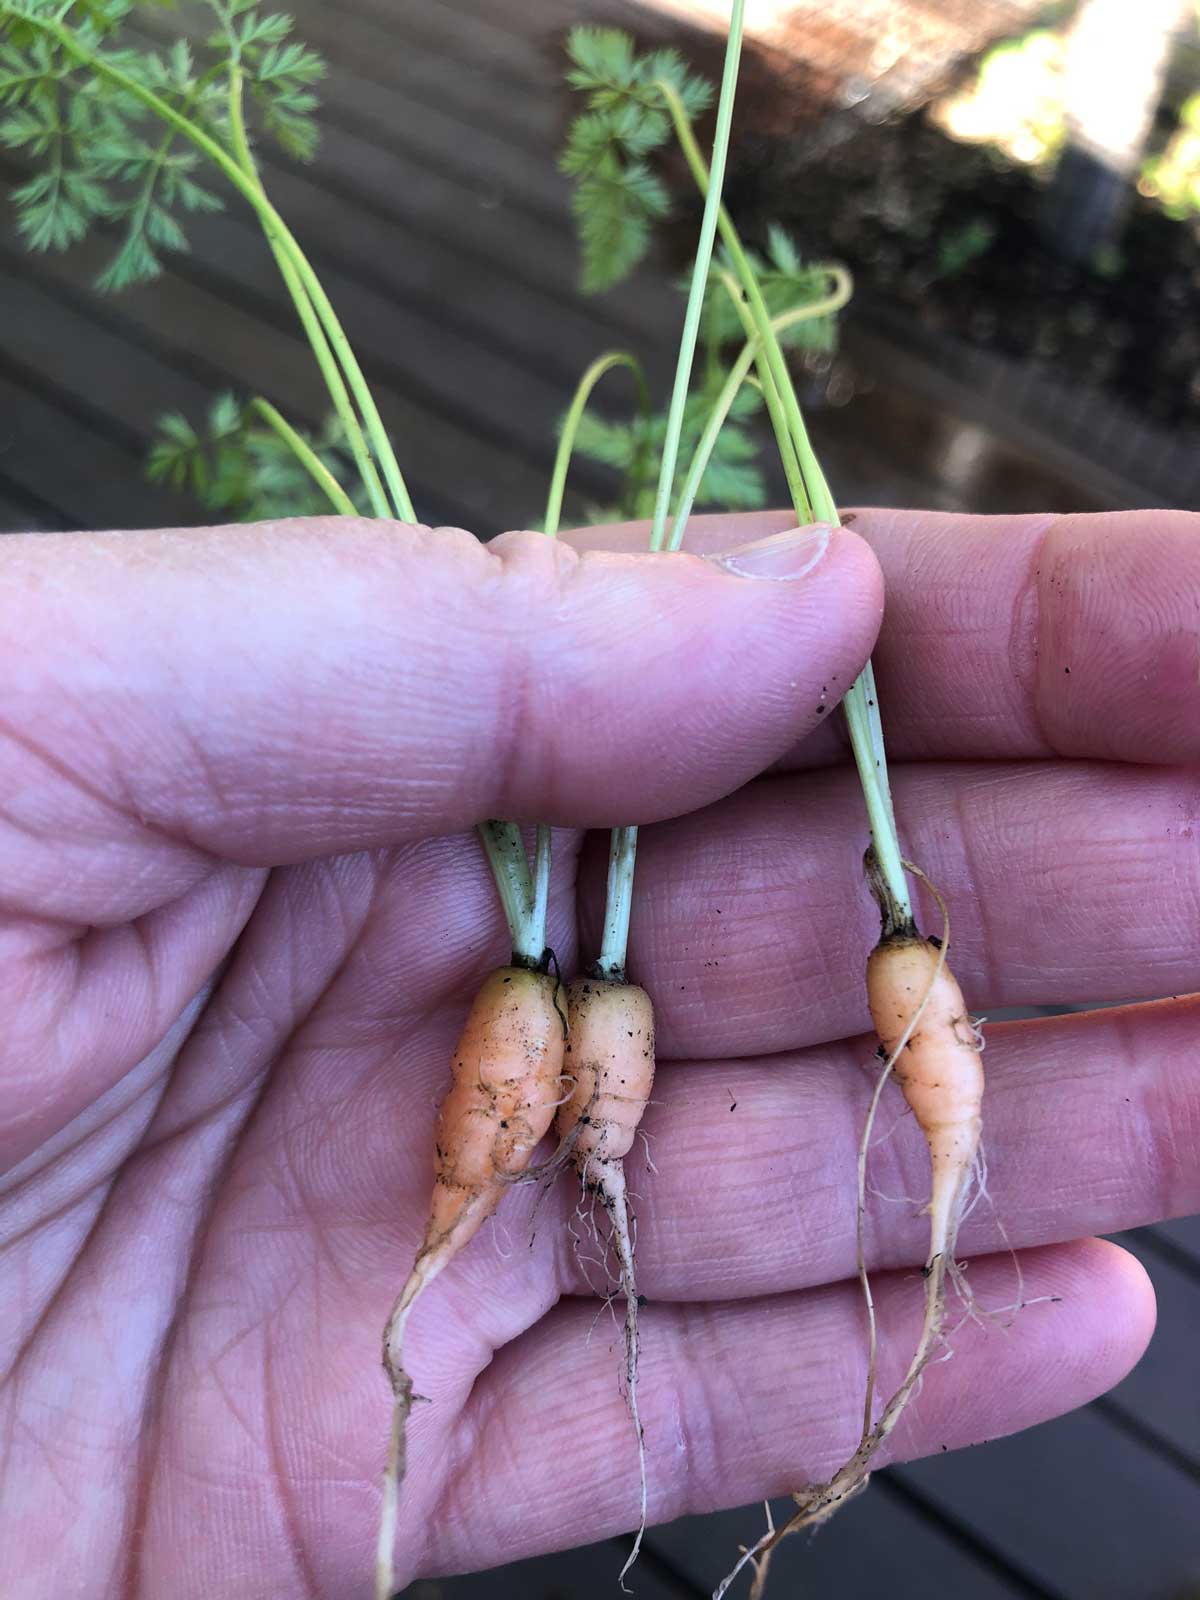 My home grown carrot harvest, tonight we feast!